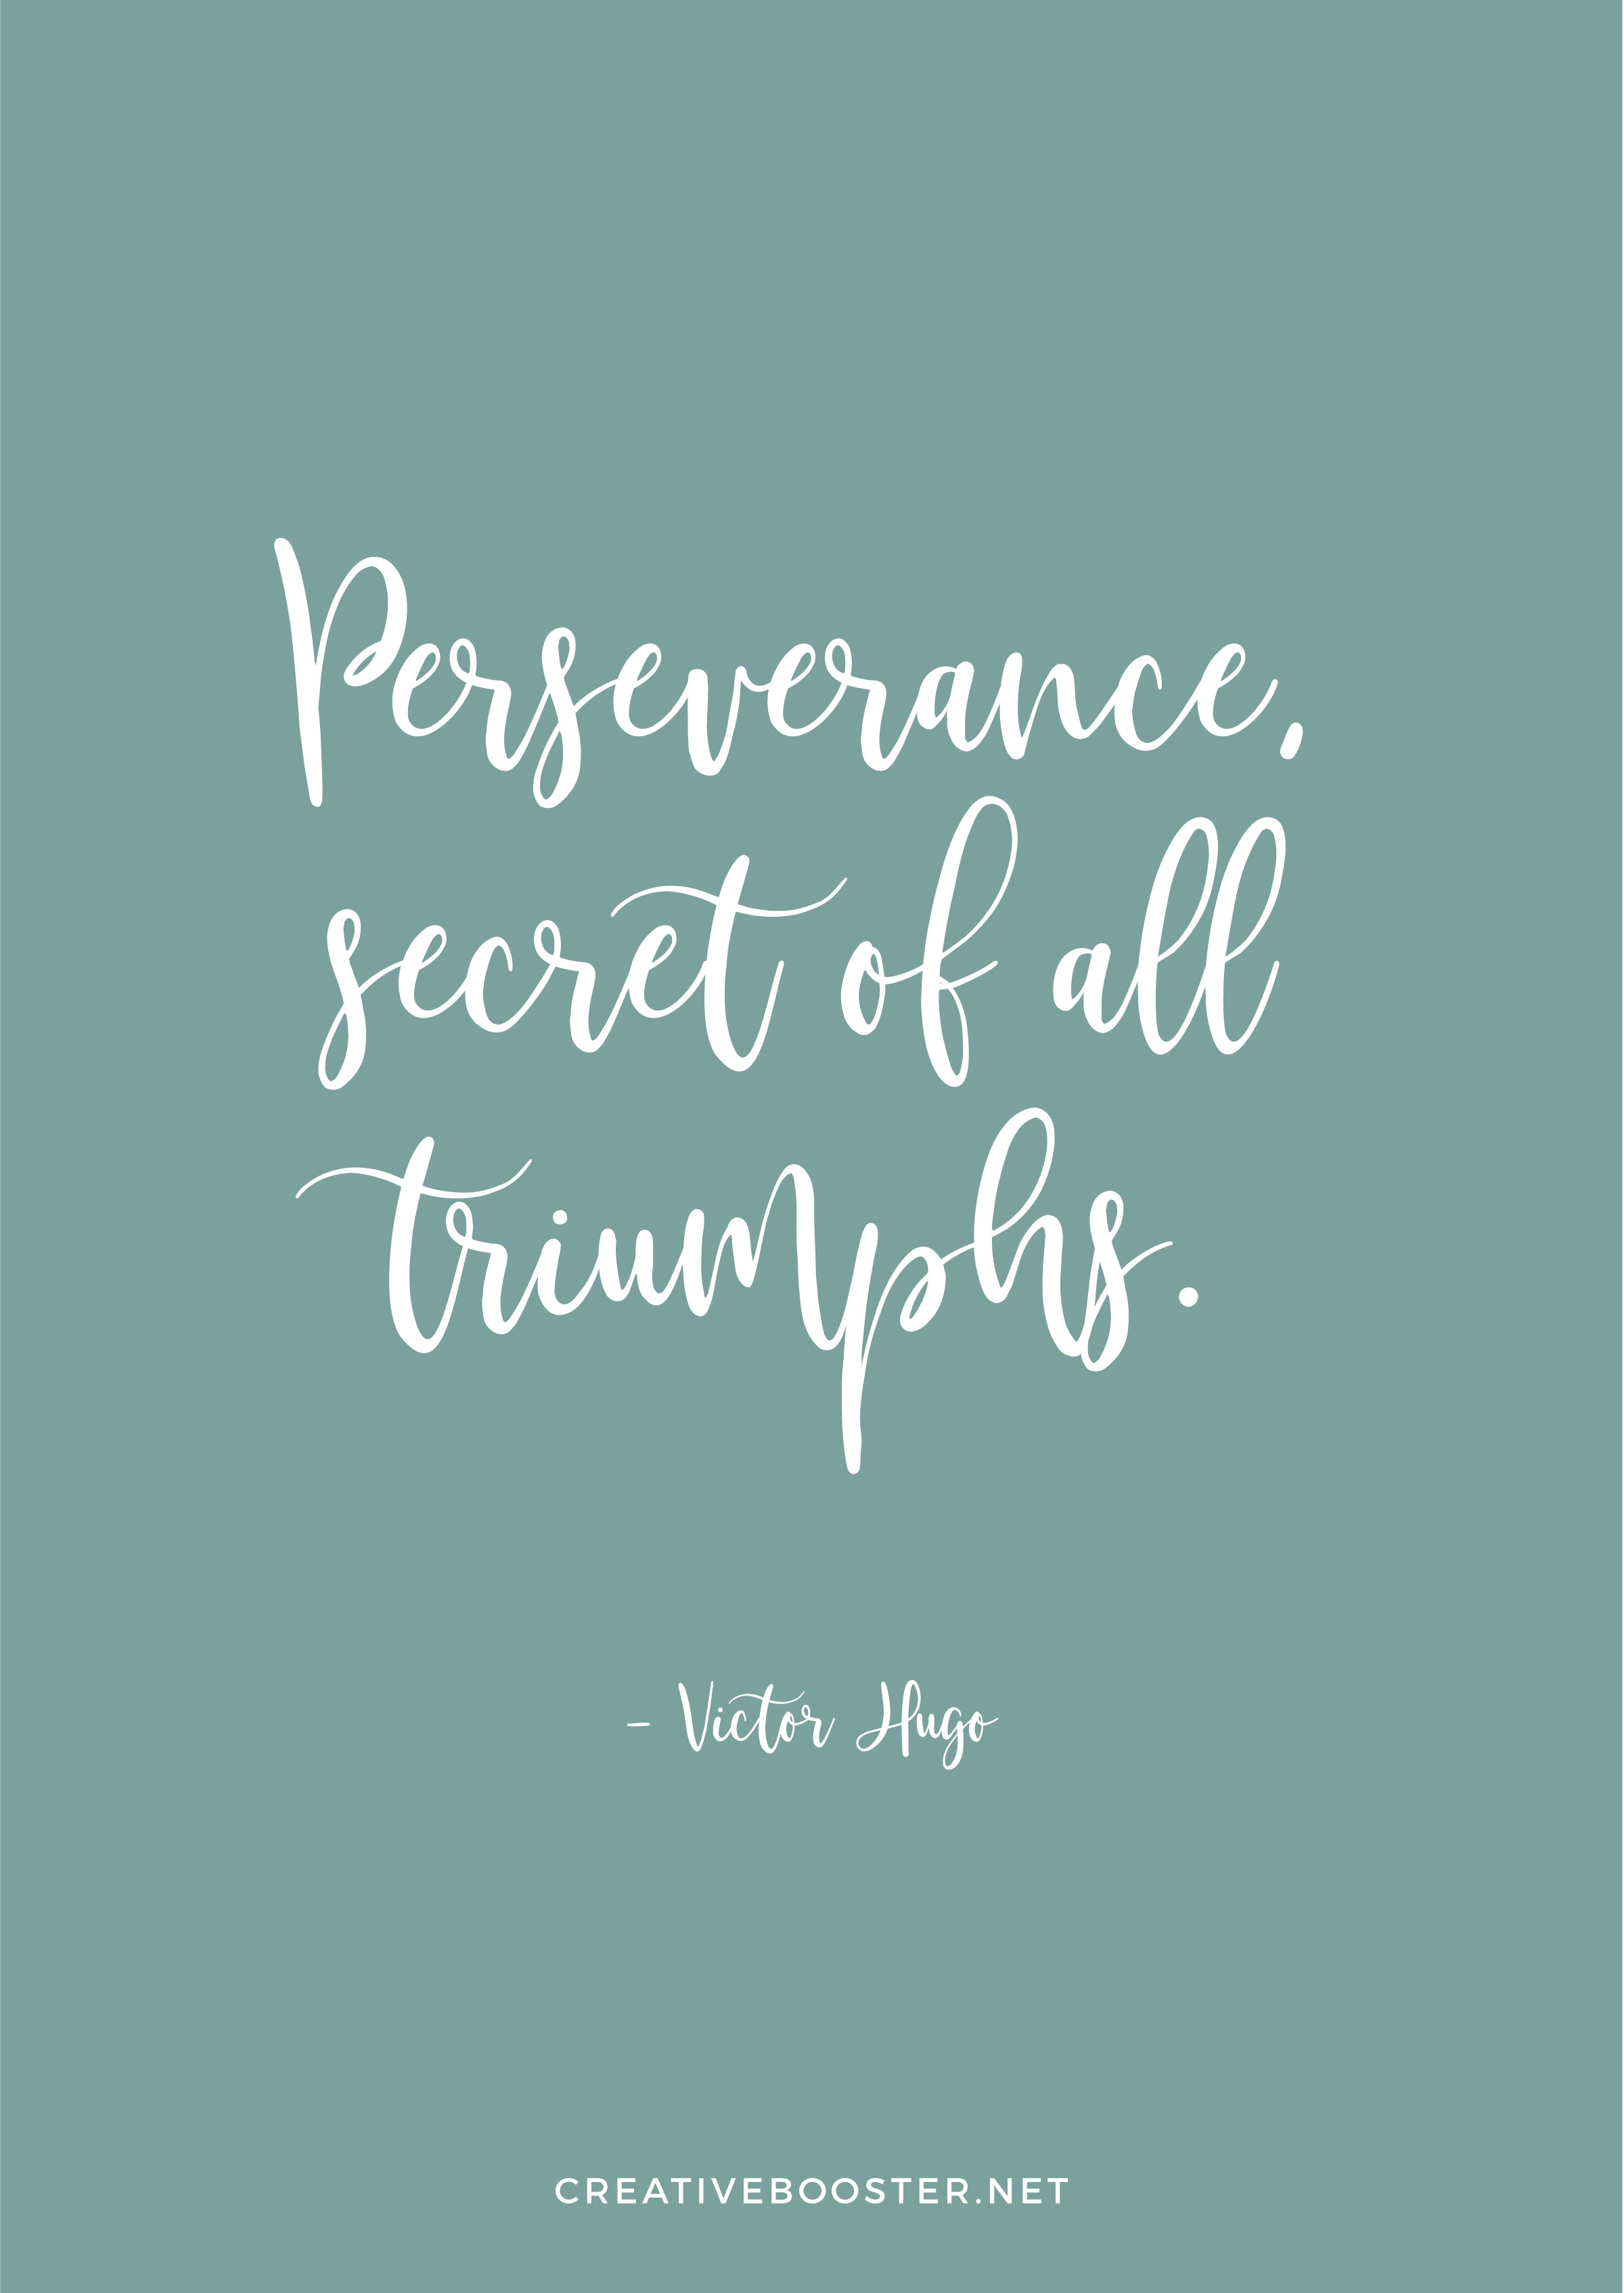 Beautiful-You-Got-This-Quotes-“Perseverance, secret of all triumphs.” – Victor Hugo (Quote Art Print)